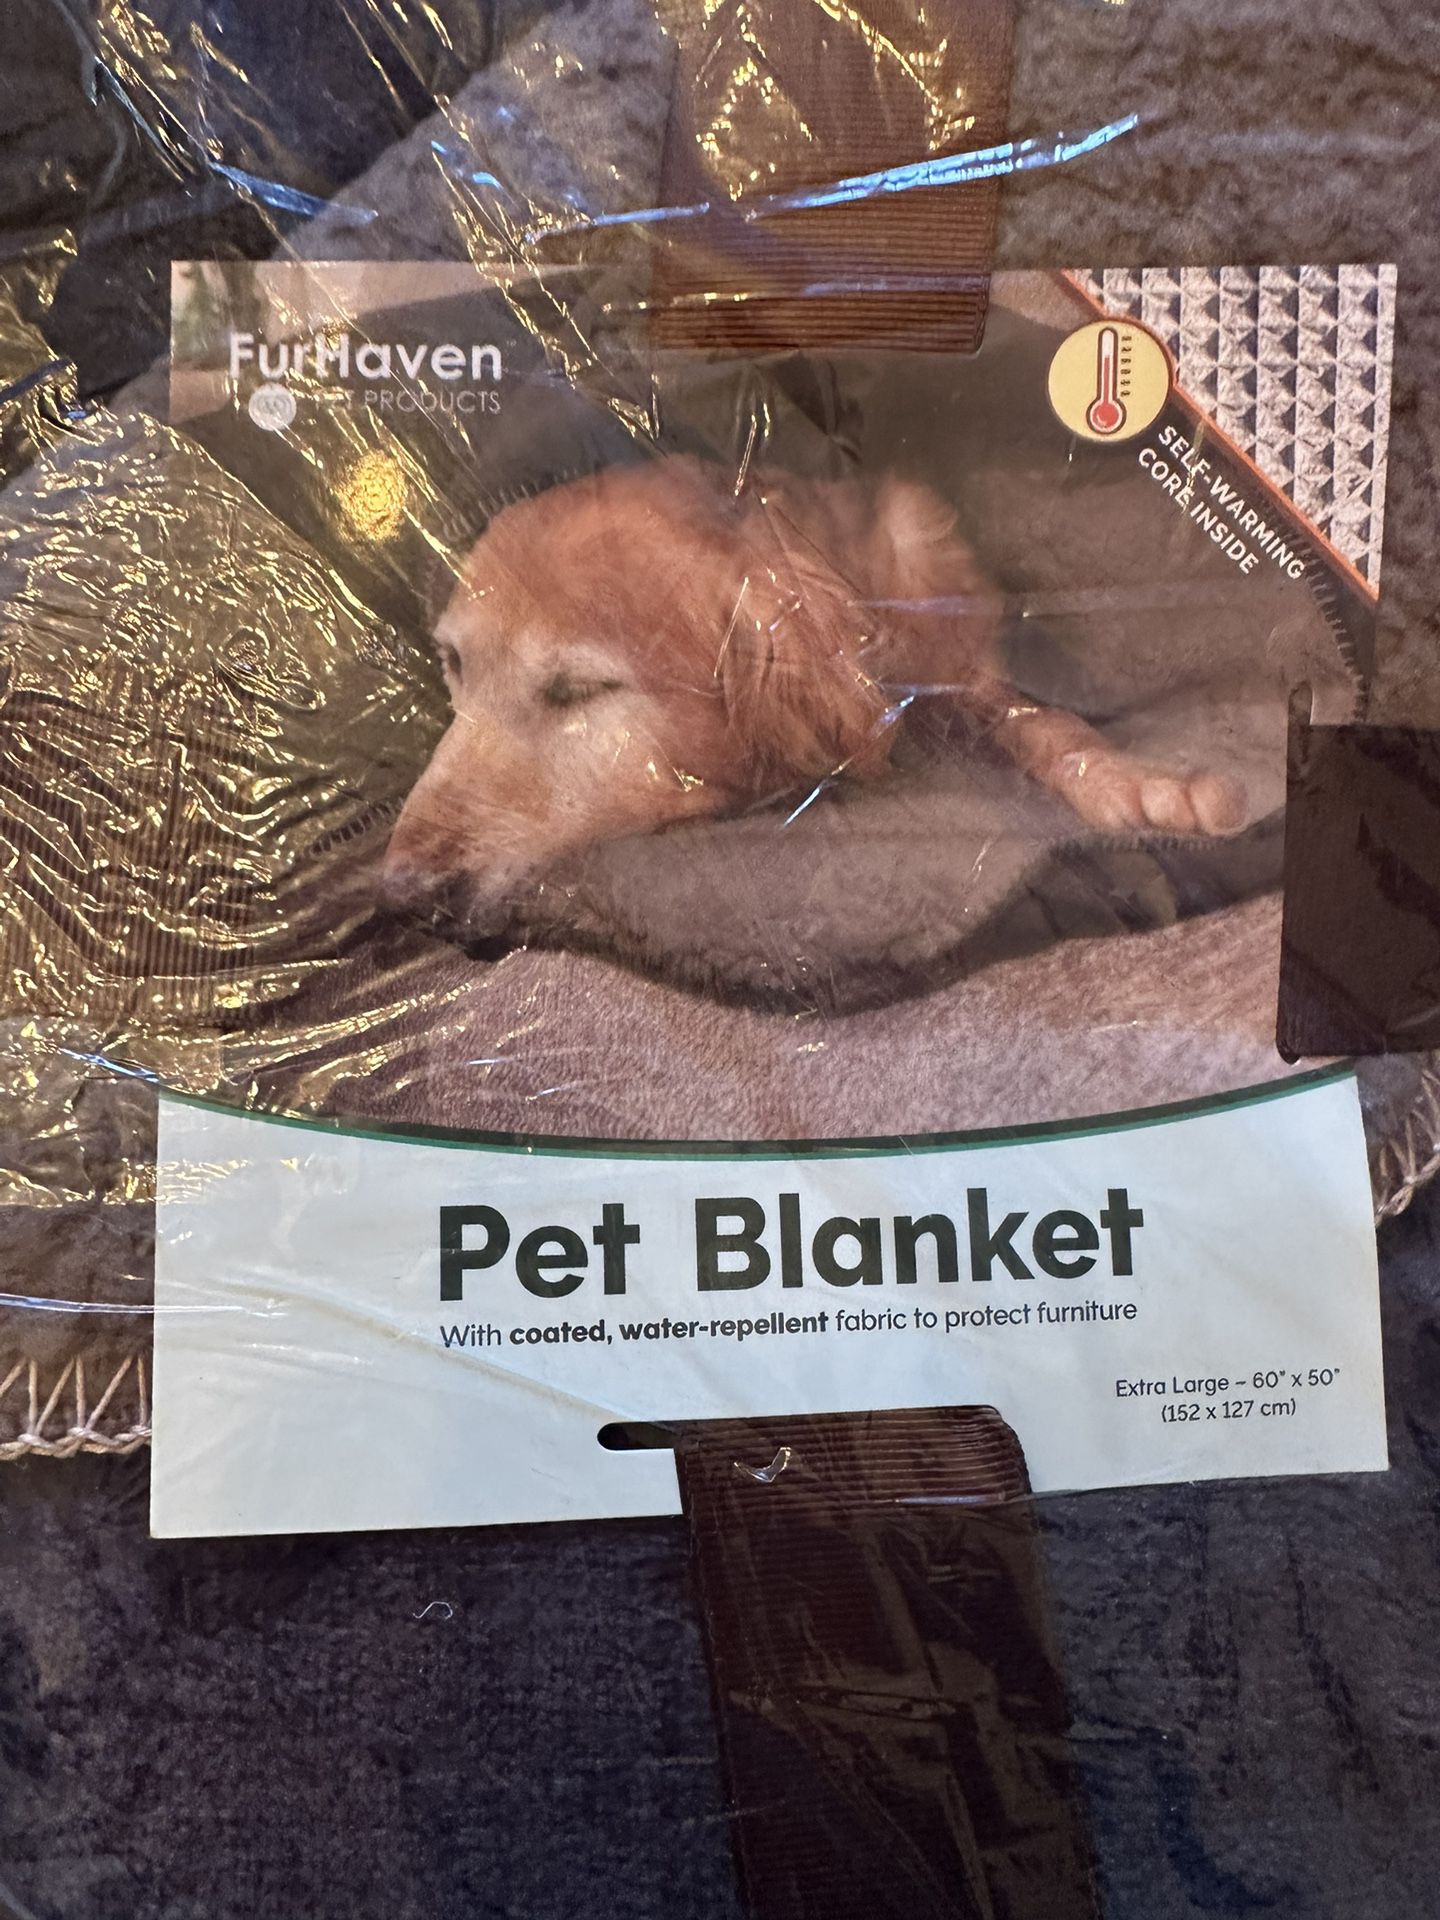 2 Identical XL PET BLANKET SELF WARMING AND WASHABLE 